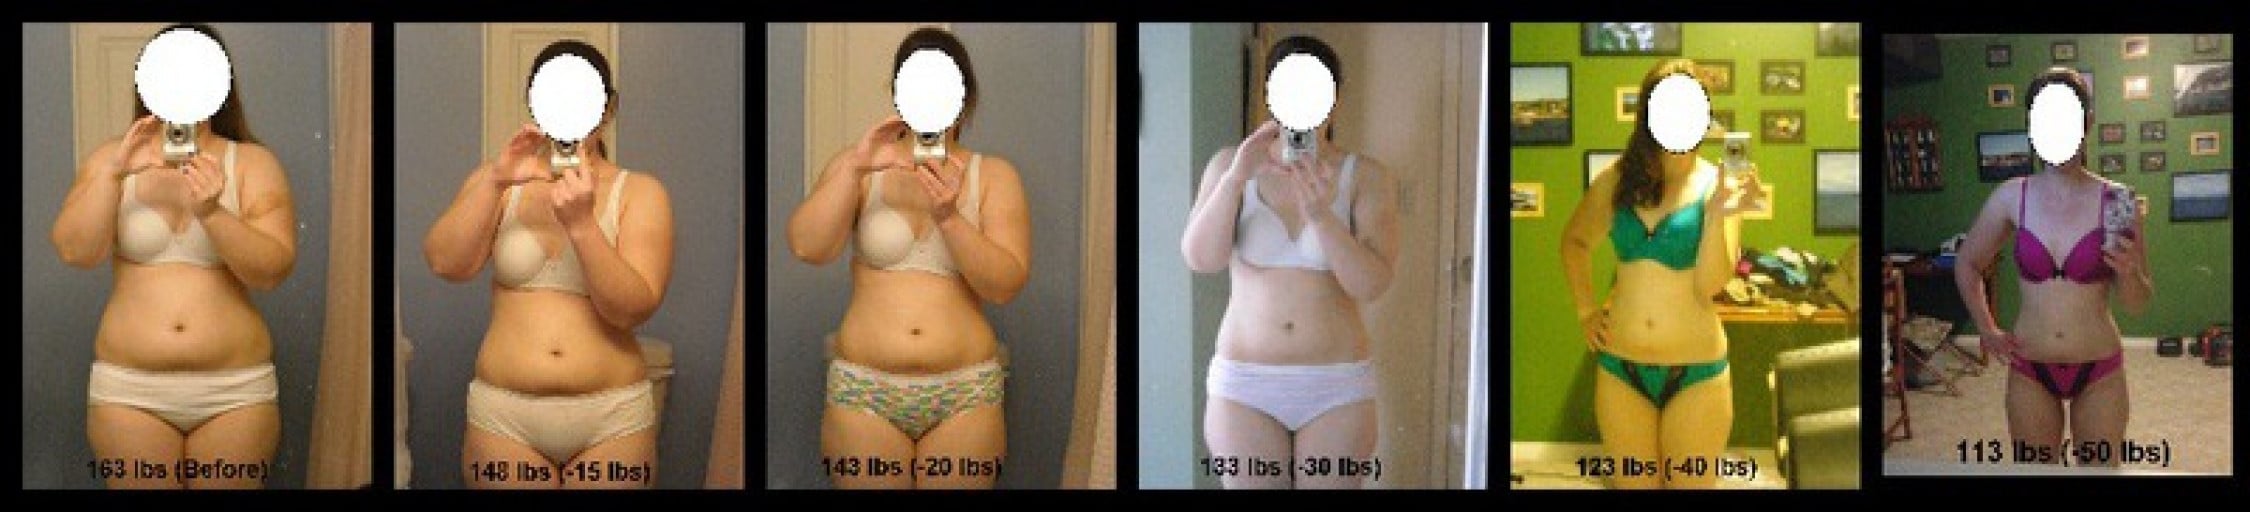 From 163 to 123 Lbs: a Successful 18 Month Weight Loss Journey